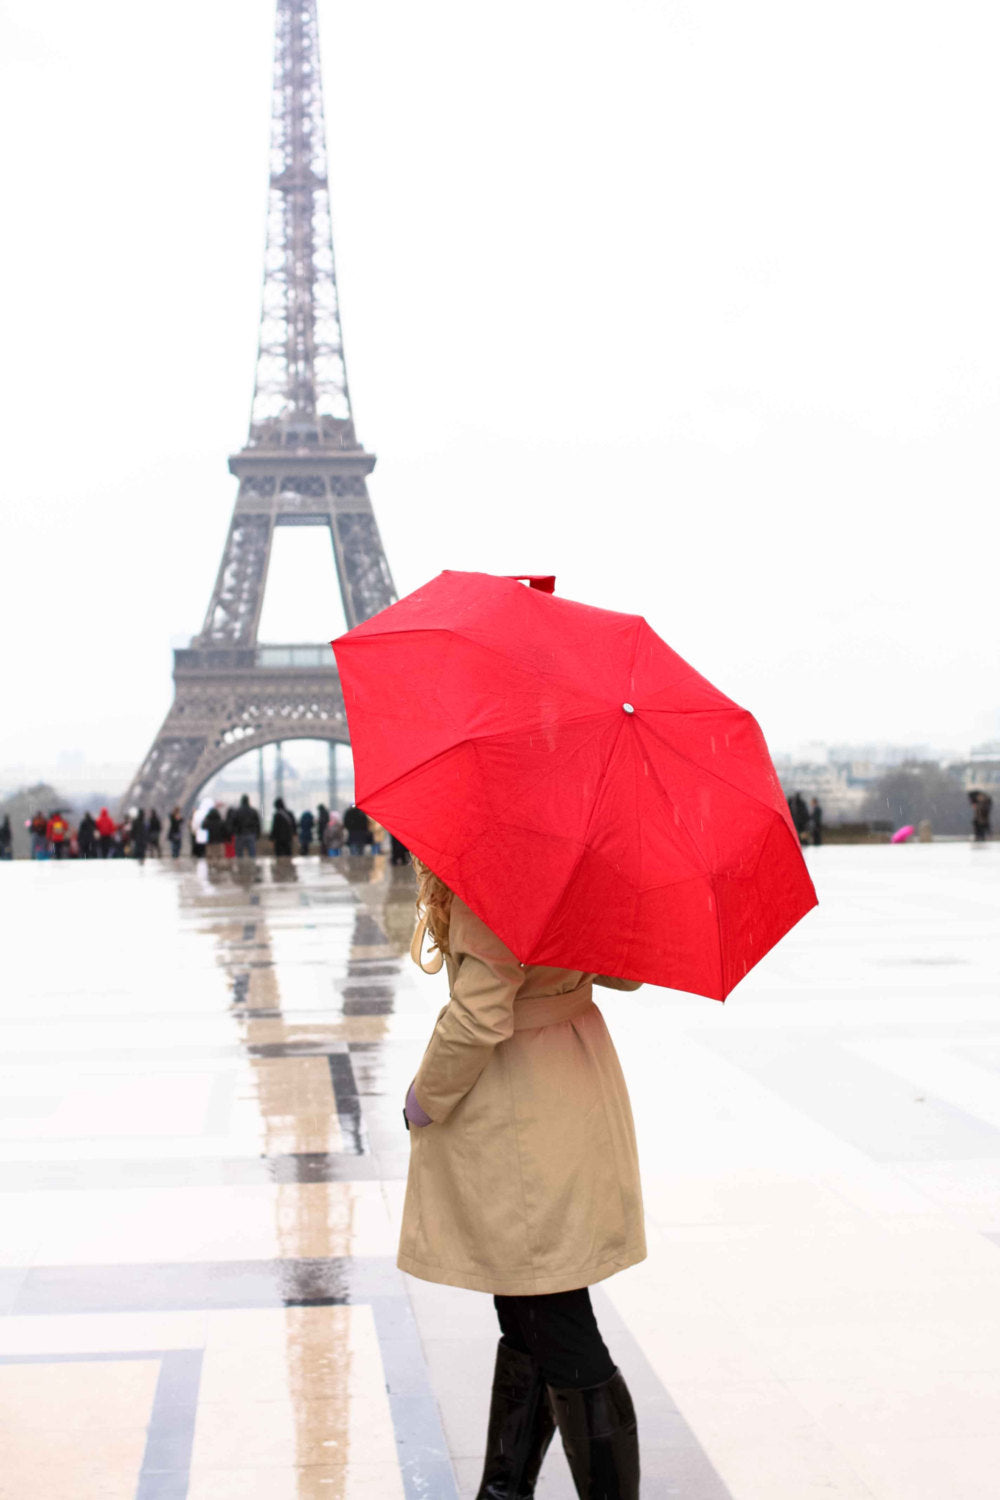 Besætte Modtagelig for guld Girl in Paris with the Red Umbrella - Everyday Parisian